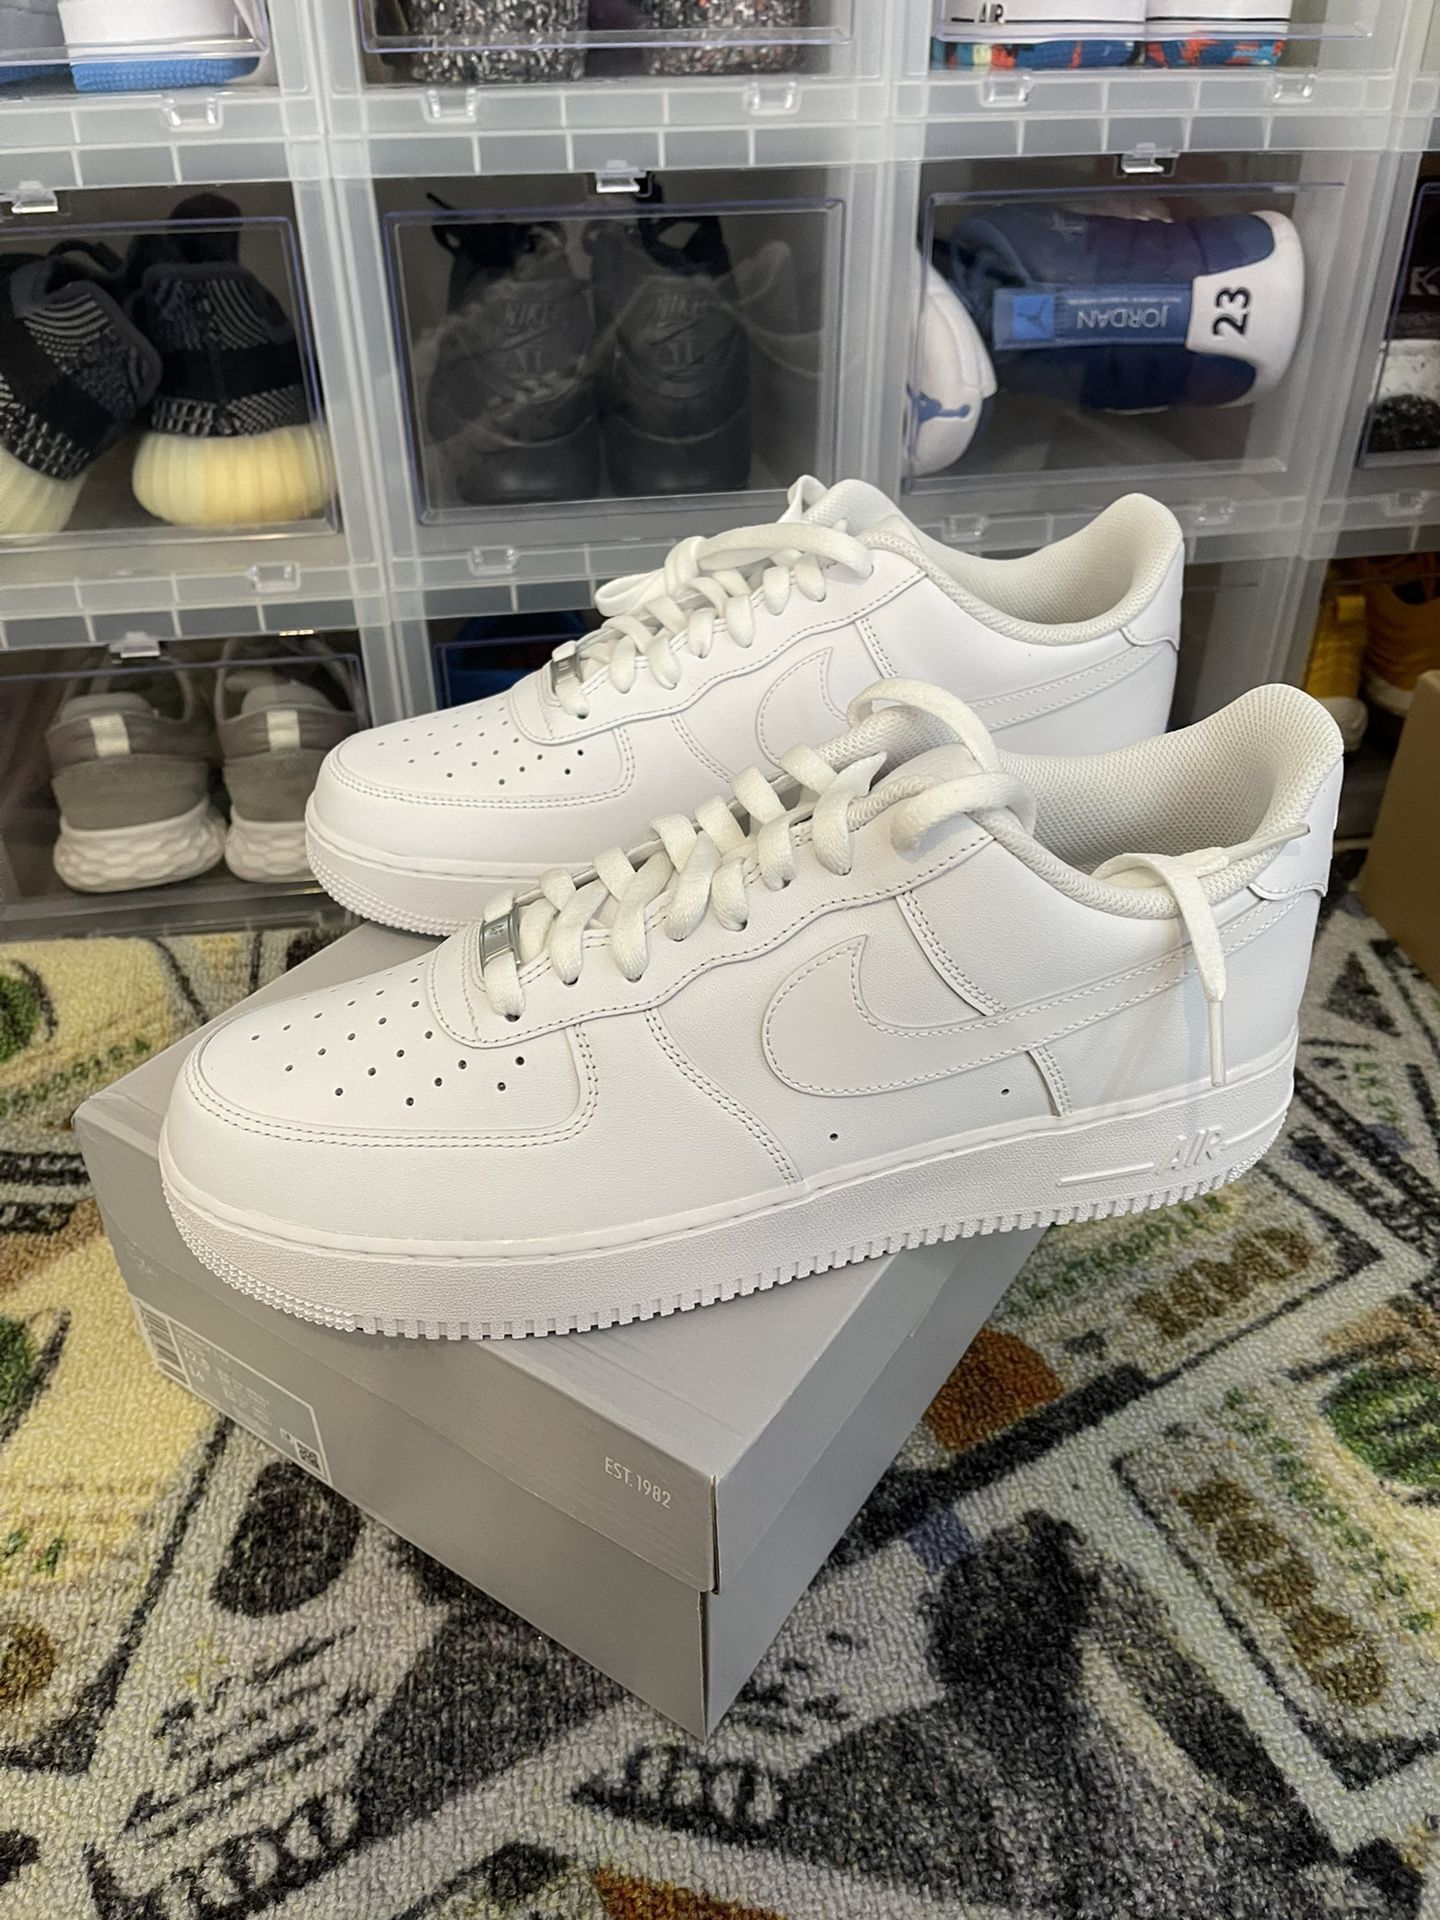 Nike Air Force 1 Men Size 9 for Sale in Newark, NJ - OfferUp